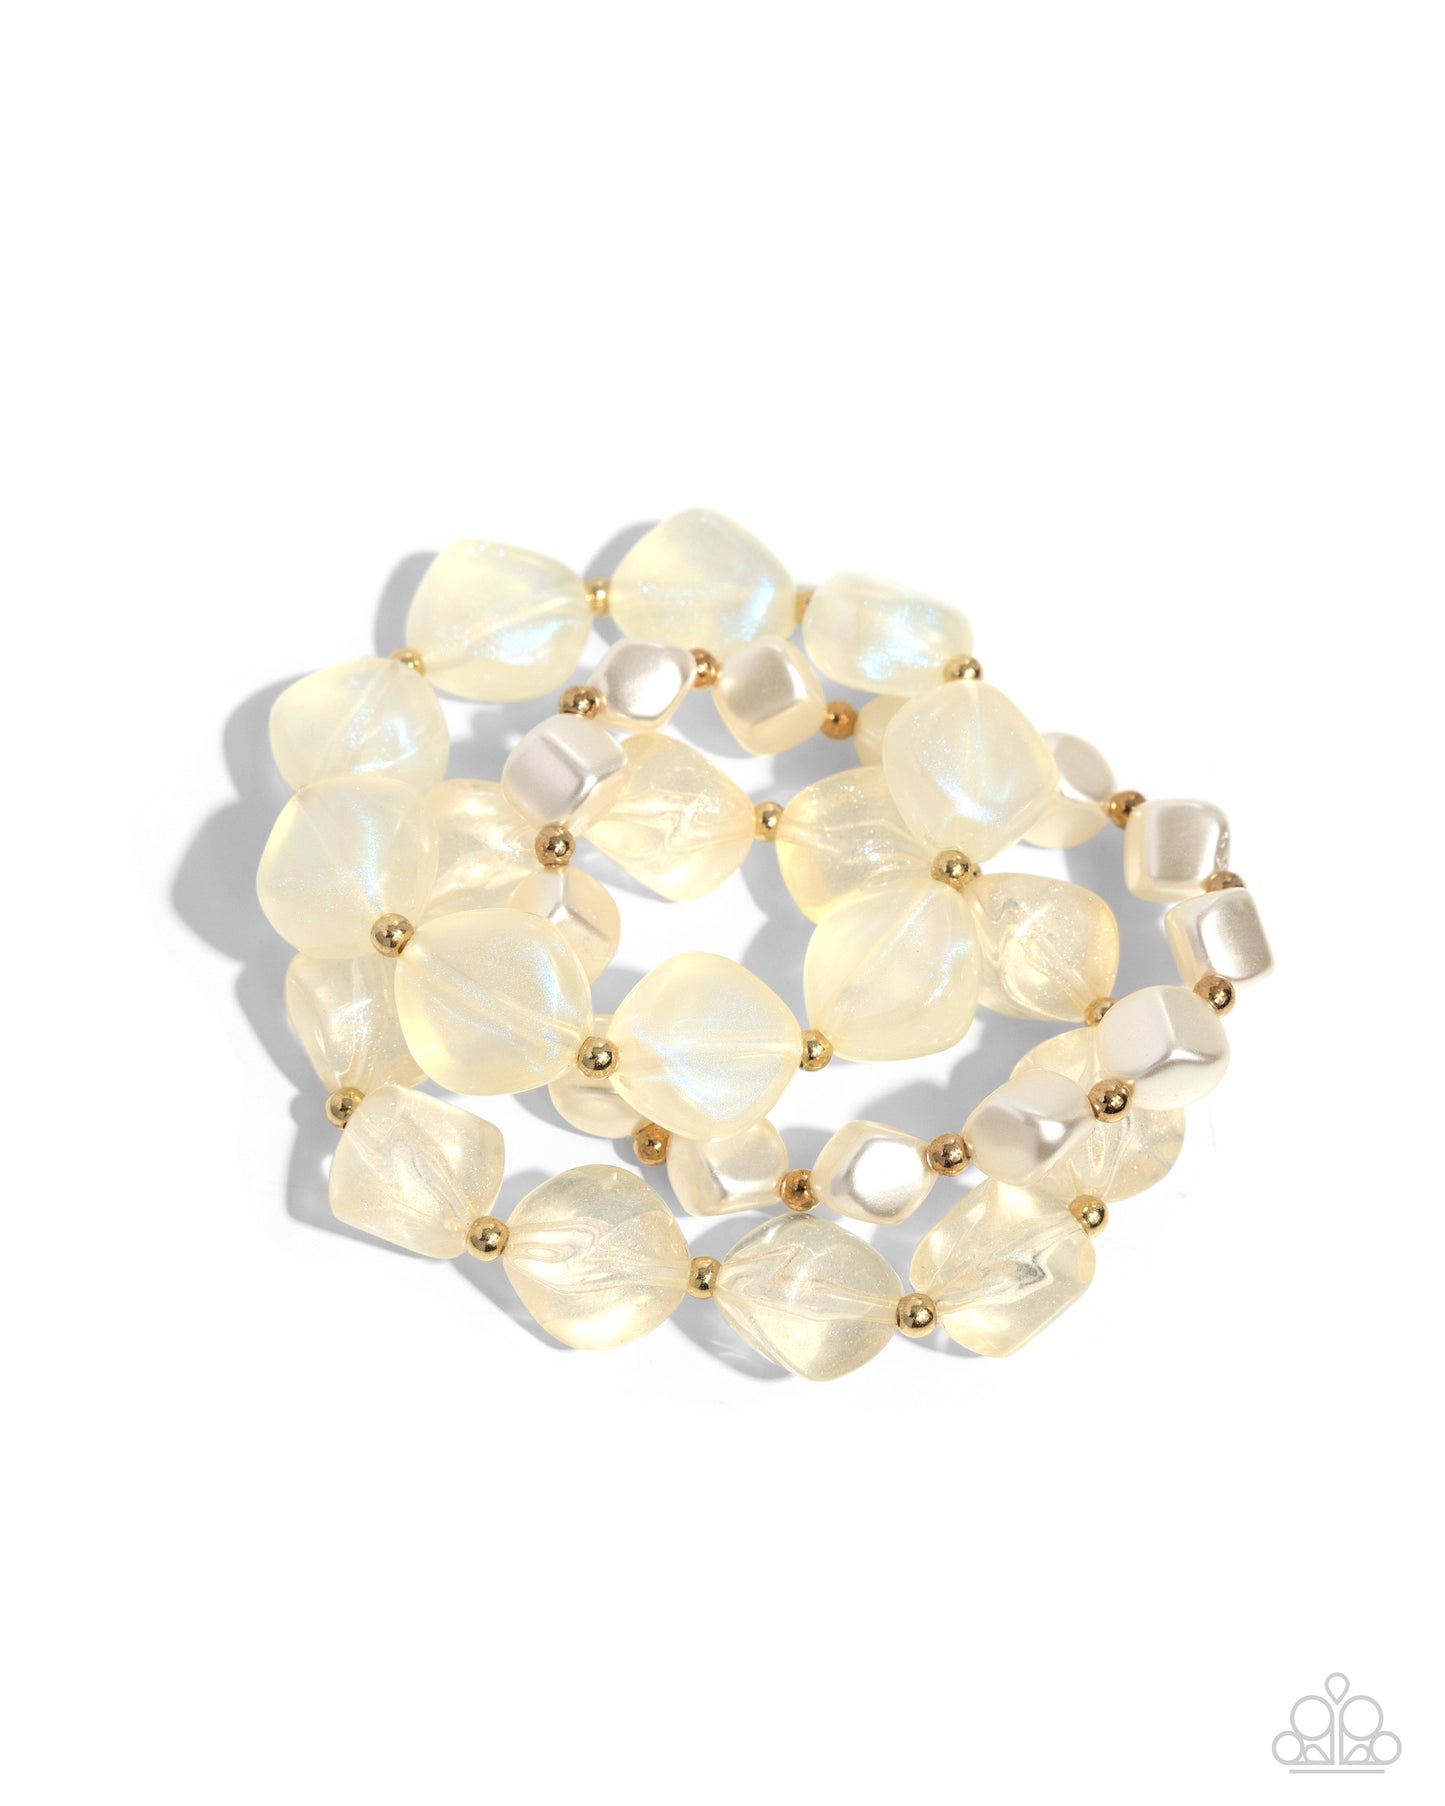 Cubed Cameo Gold-Set